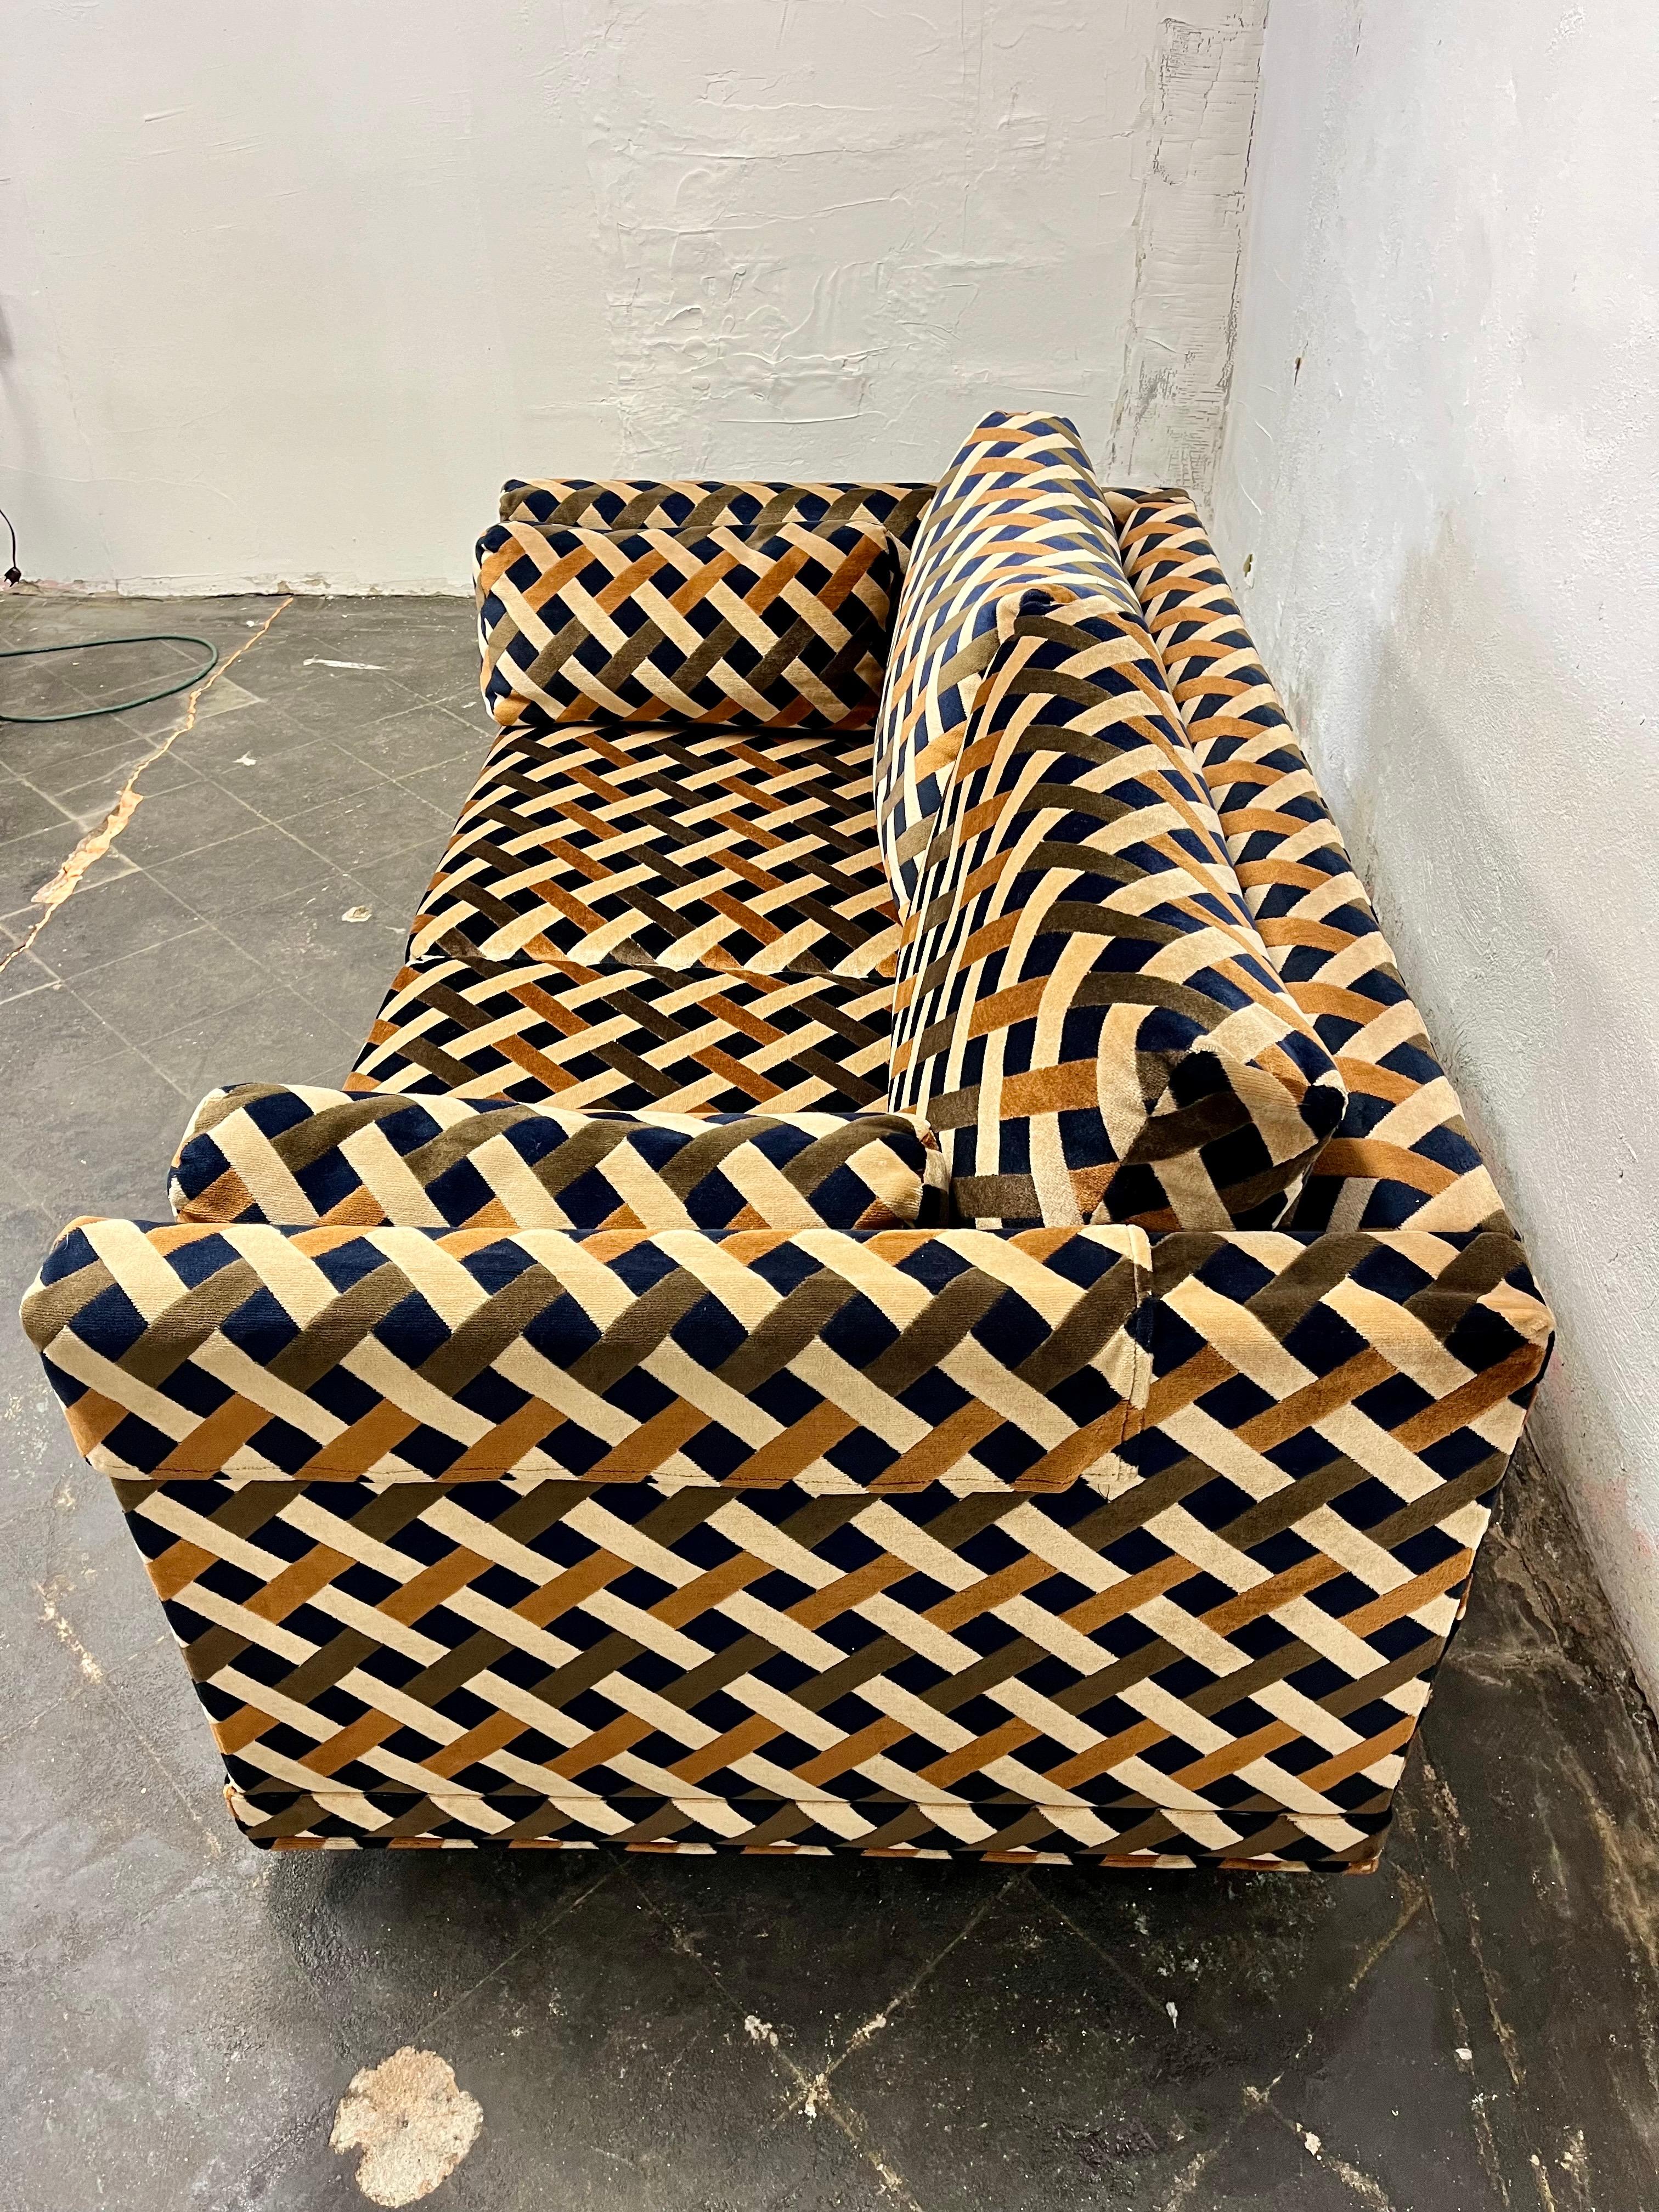 Stunning lattice or basket weave velour loveseat by Peck & Hills, NYC. Fantastic colors with browns, tan and dark navy blue that appears black in the manner of Jack Lenor Larsen. One owner purchased in 1977. Still retains arm rest covers and as good